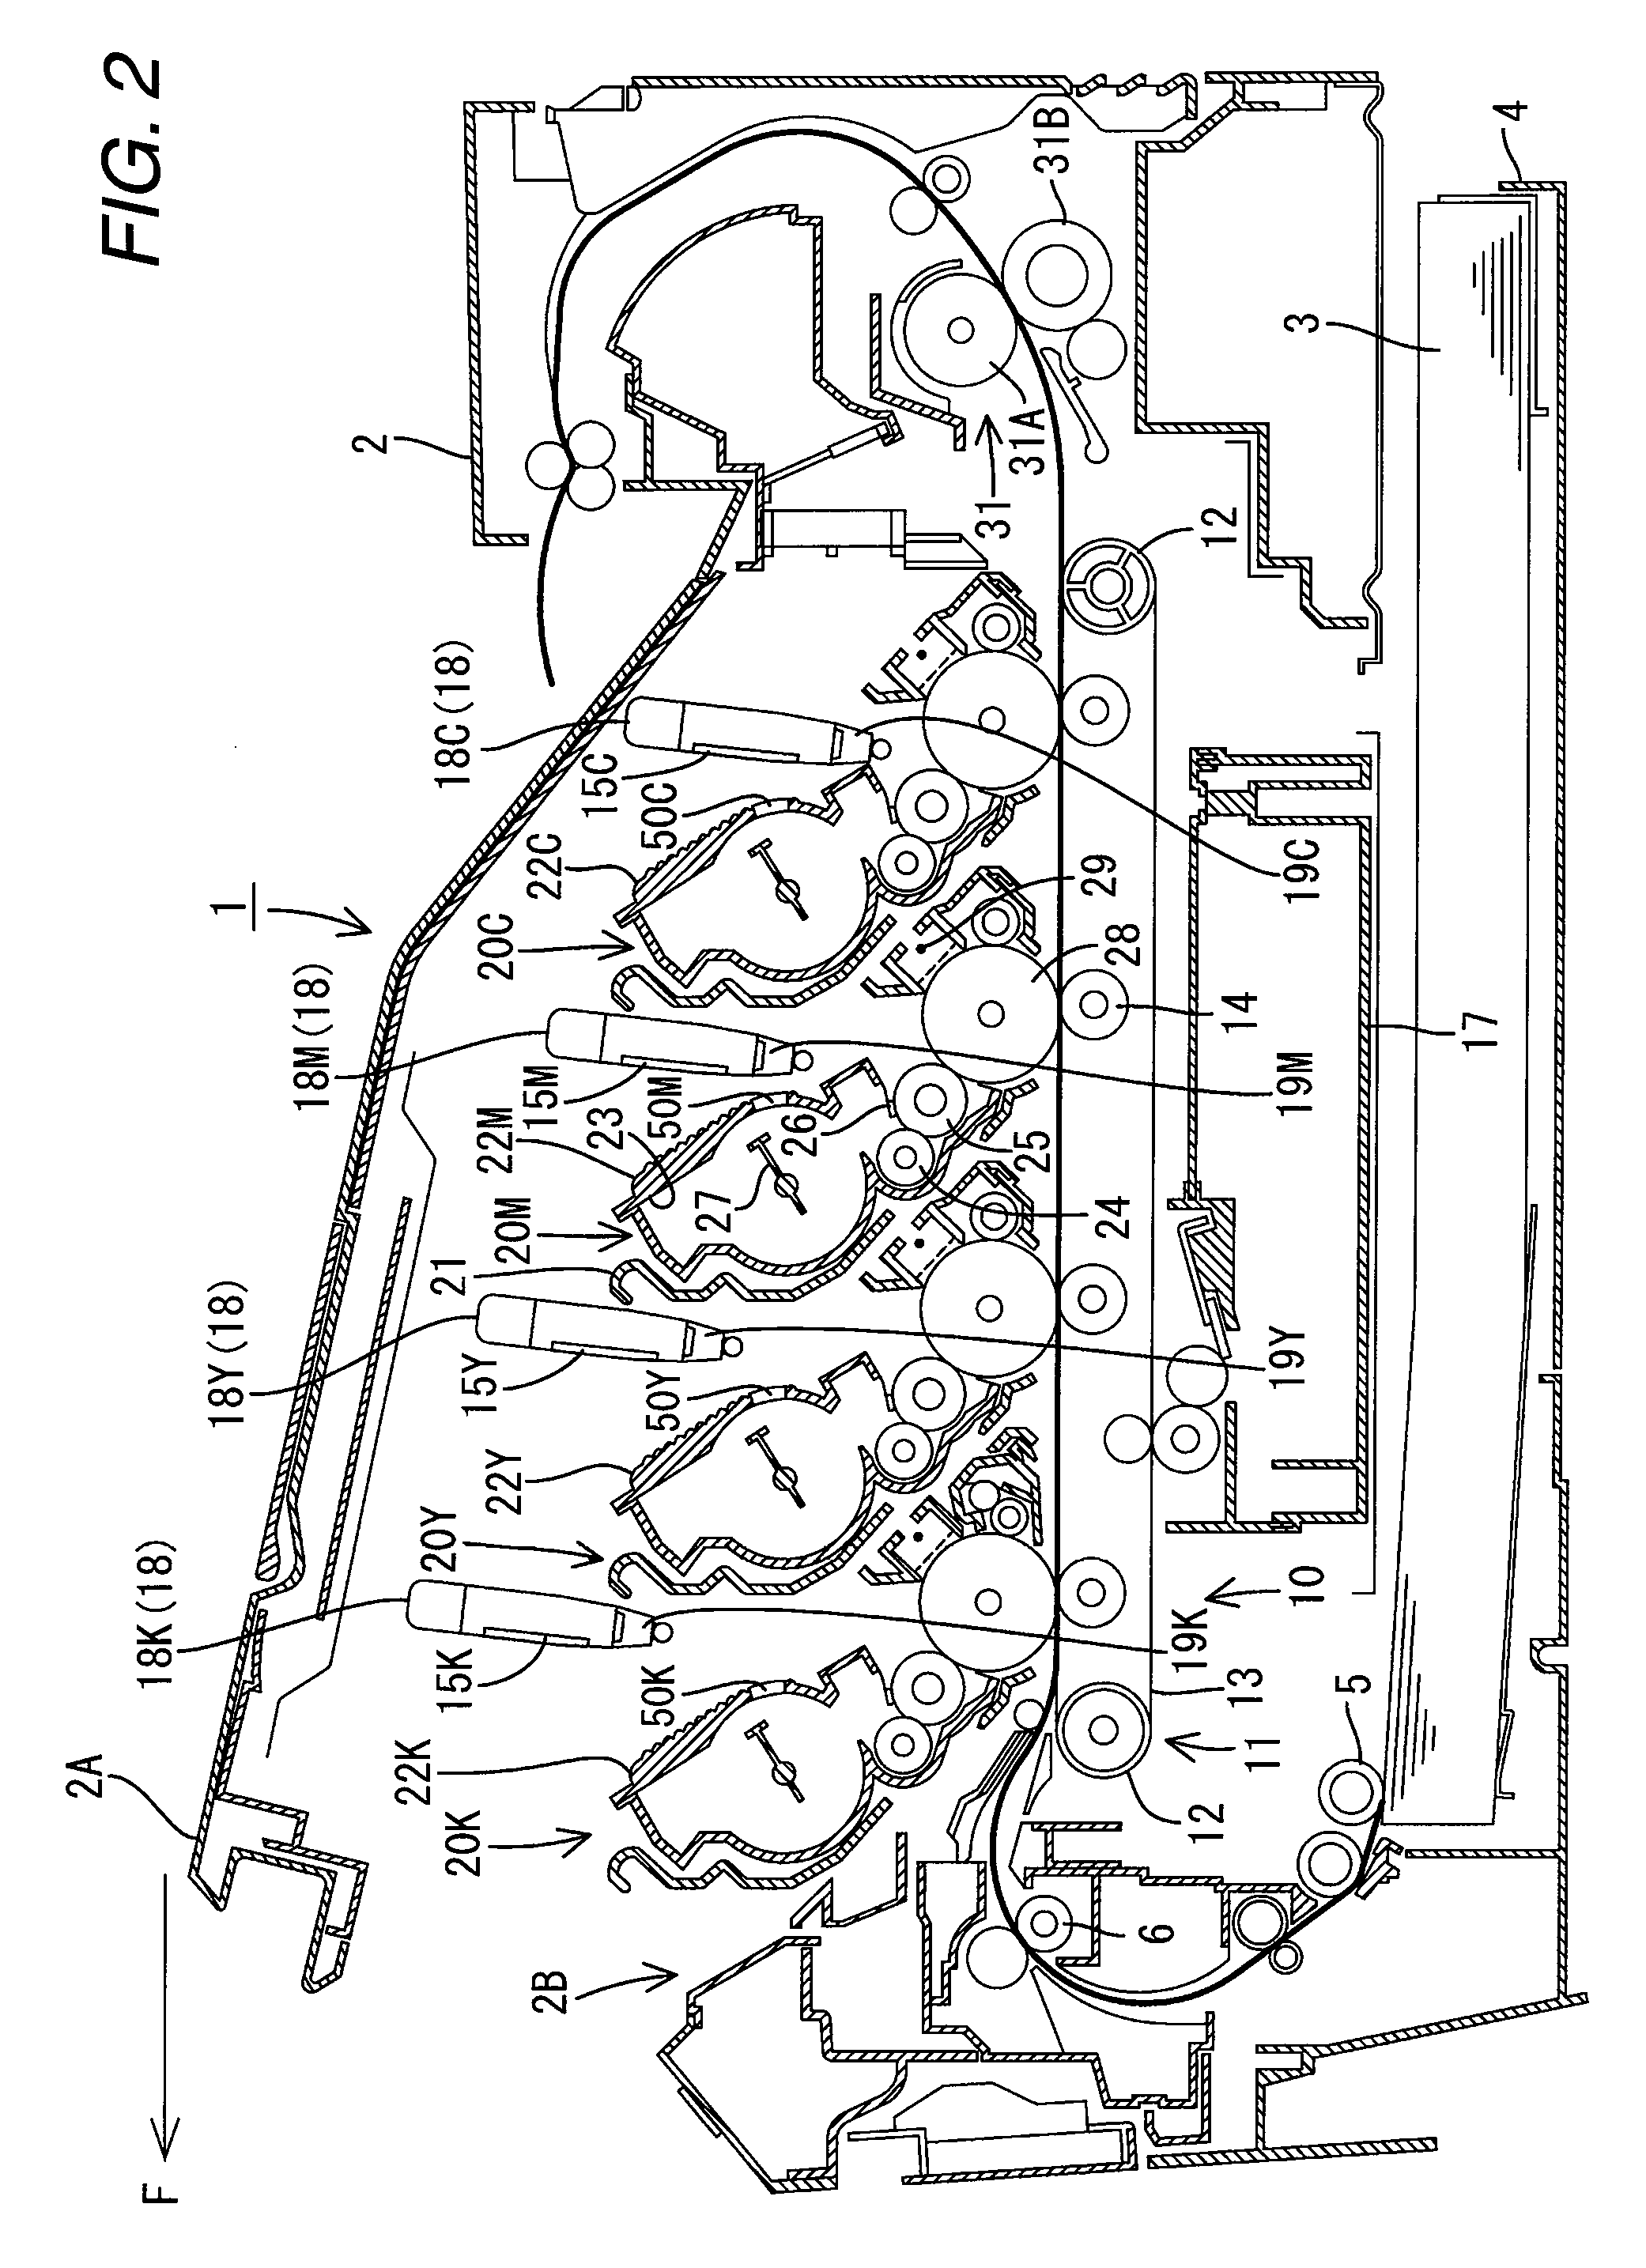 Image forming apparatus and development cartridge